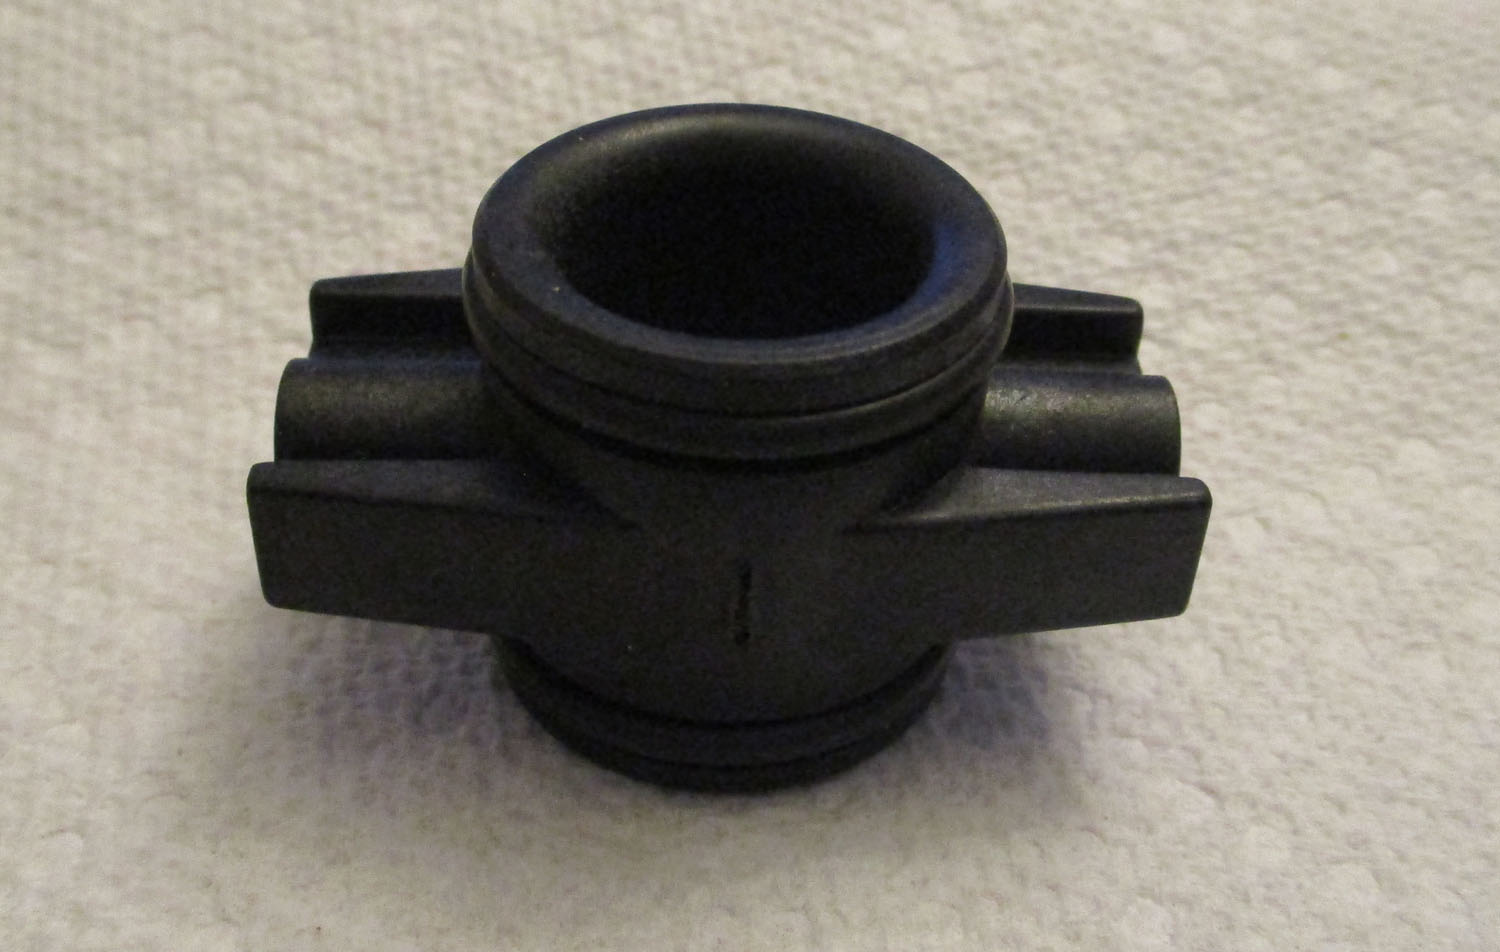 Coupling with #16 O ring for Premier Valve